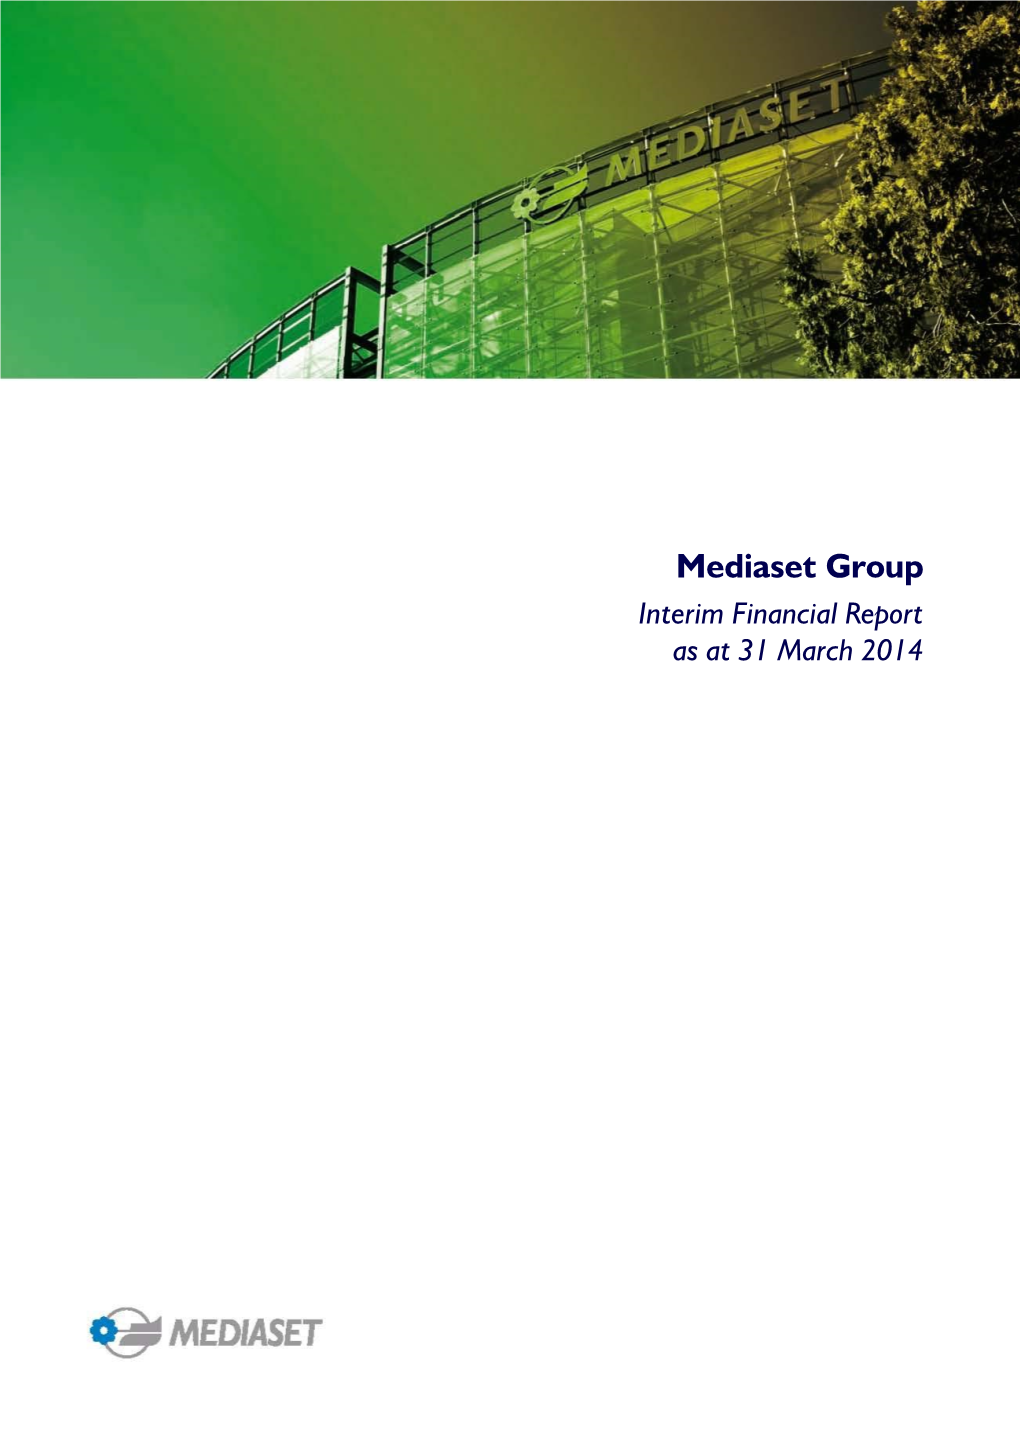 Mediaset Group Interim Financial Report As at 31 March 2014